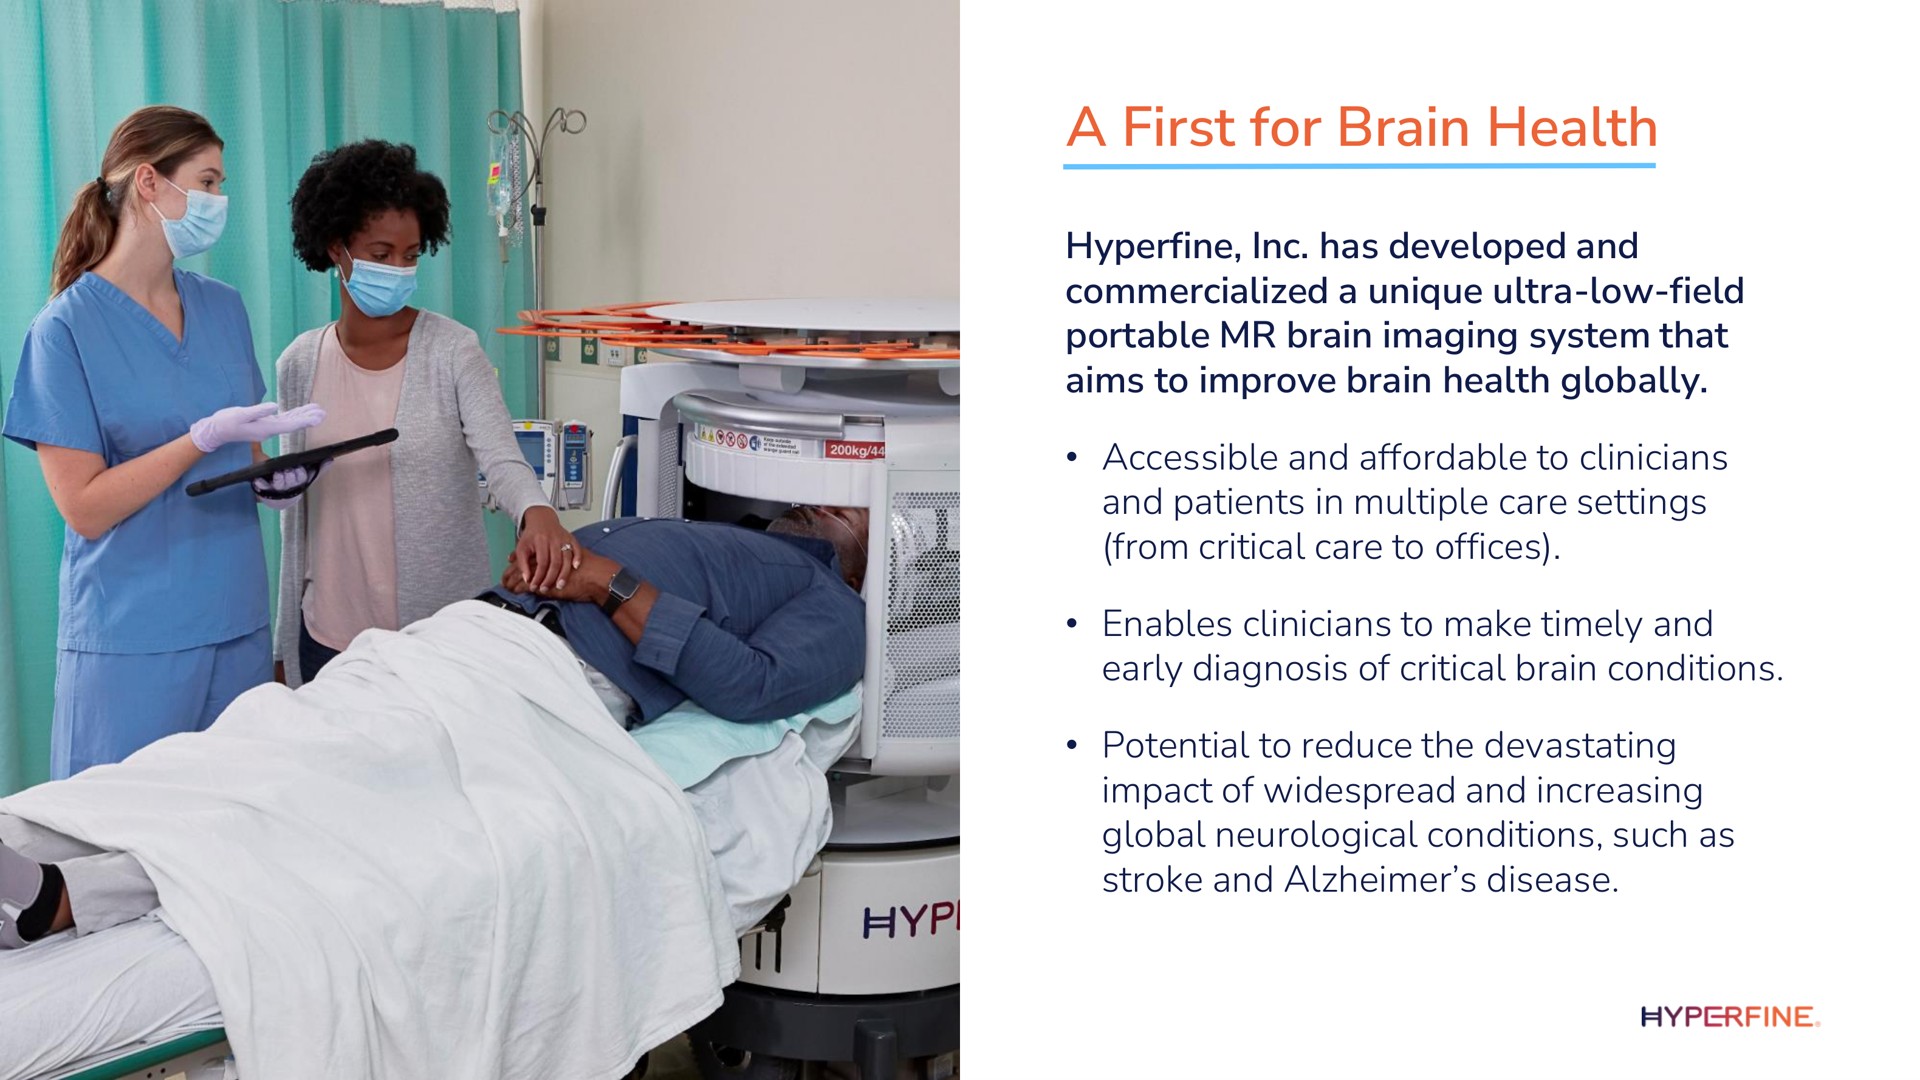 a first for brain health hyperfine has developed and commercialized a unique ultra low field portable brain imaging system that aims to improve brain health globally accessible and affordable to clinicians and patients in multiple care settings from critical care to offices enables clinicians to make timely and early diagnosis of critical brain conditions potential to reduce the devastating impact of widespread and increasing global neurological conditions such as stroke and disease | Hyperfine